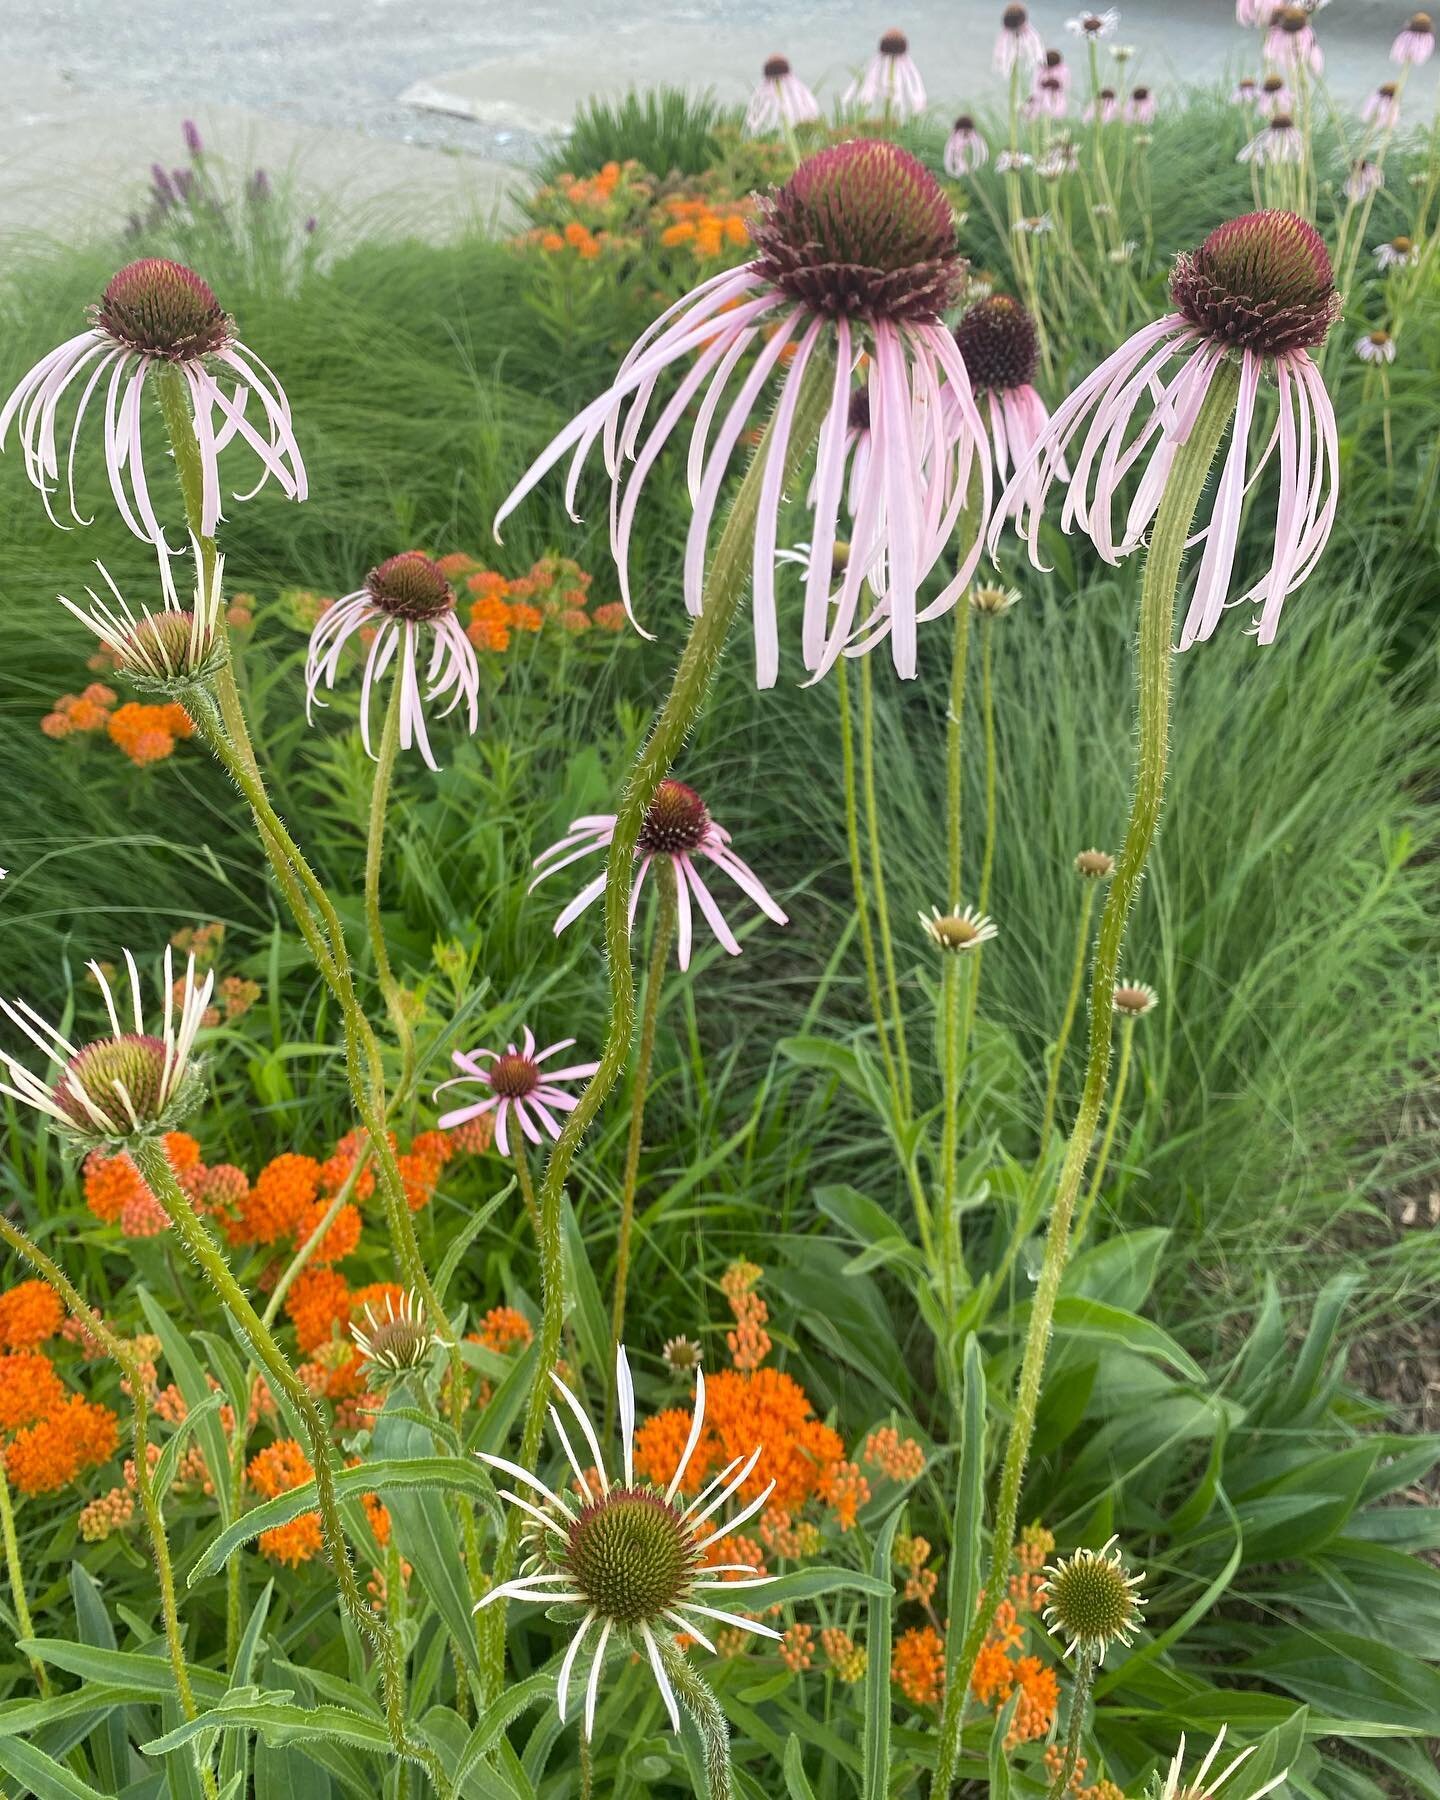 This echinacea pallida is planted in a mixed matrix planting at our shop. This was one of the plants that got me interested in a career as a designer and plantsman. #nativeplants